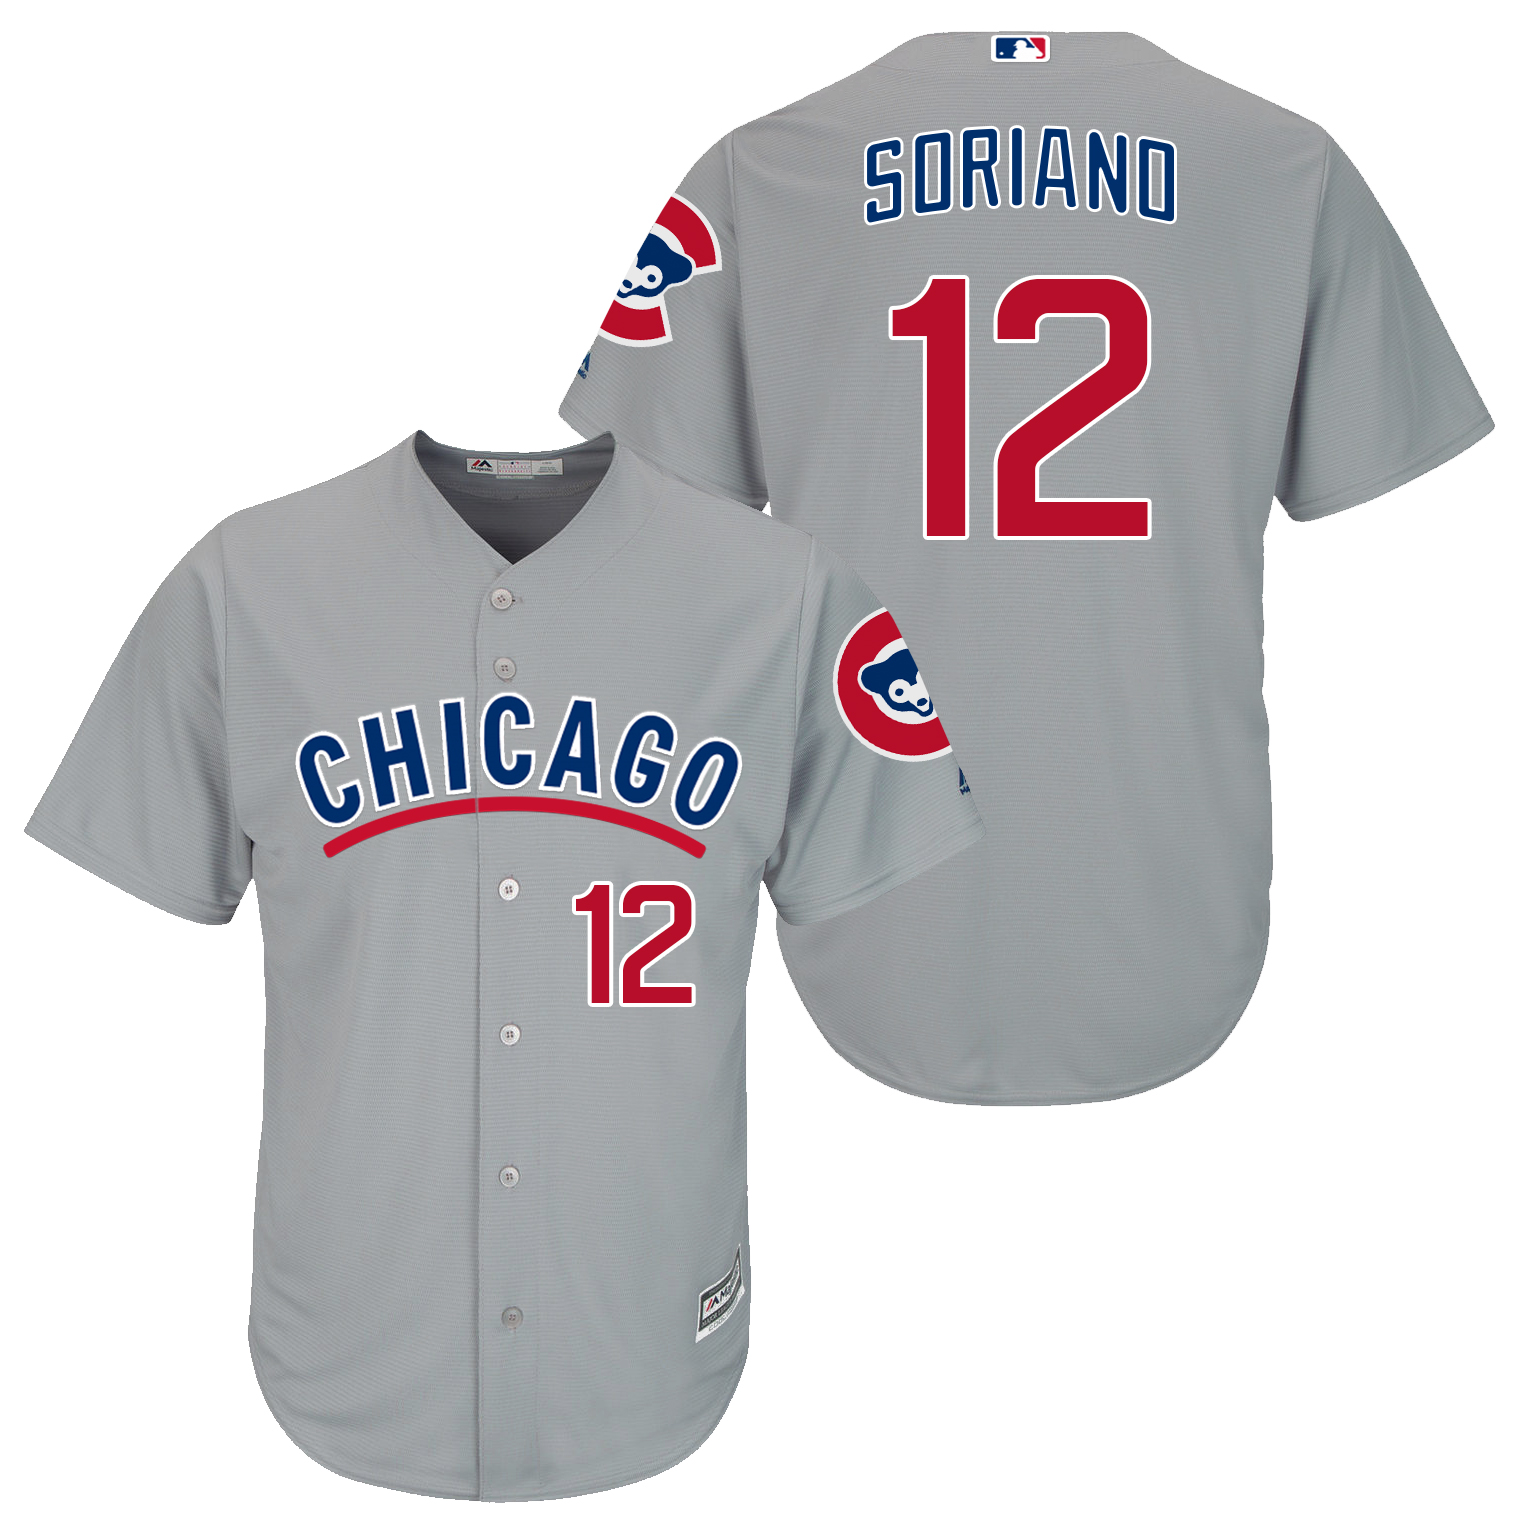 Cubs 12 Alfonso Soriano Grey New Cool Base Jersey